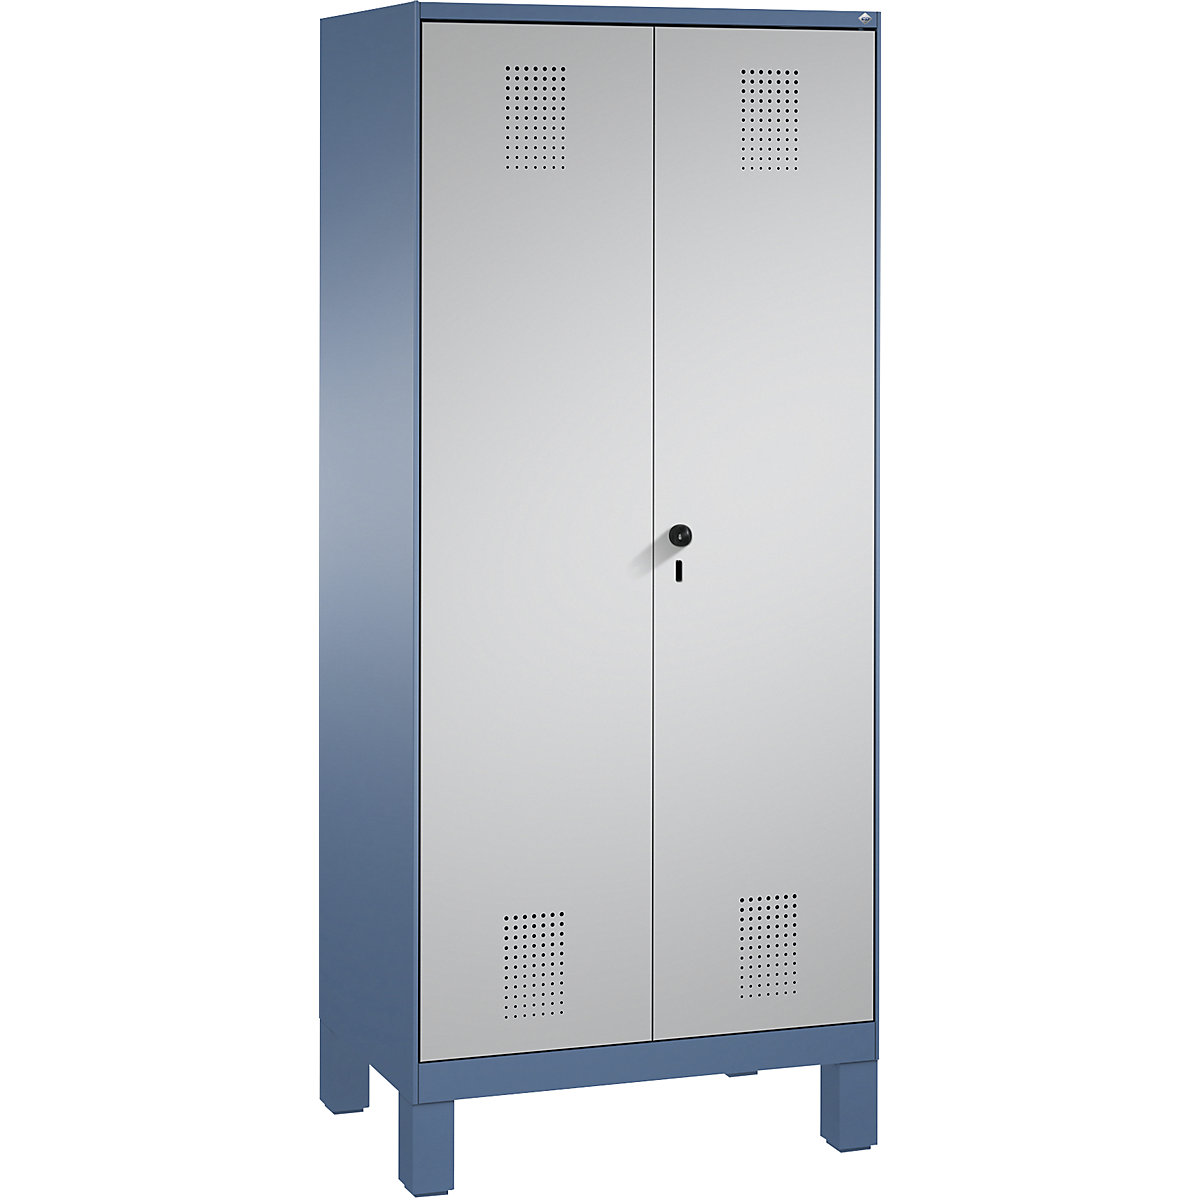 EVOLO storage cupboard, doors close in the middle, with feet – C+P, 2 compartments, 8 shelves, compartment width 400 mm, distant blue / white aluminium-4